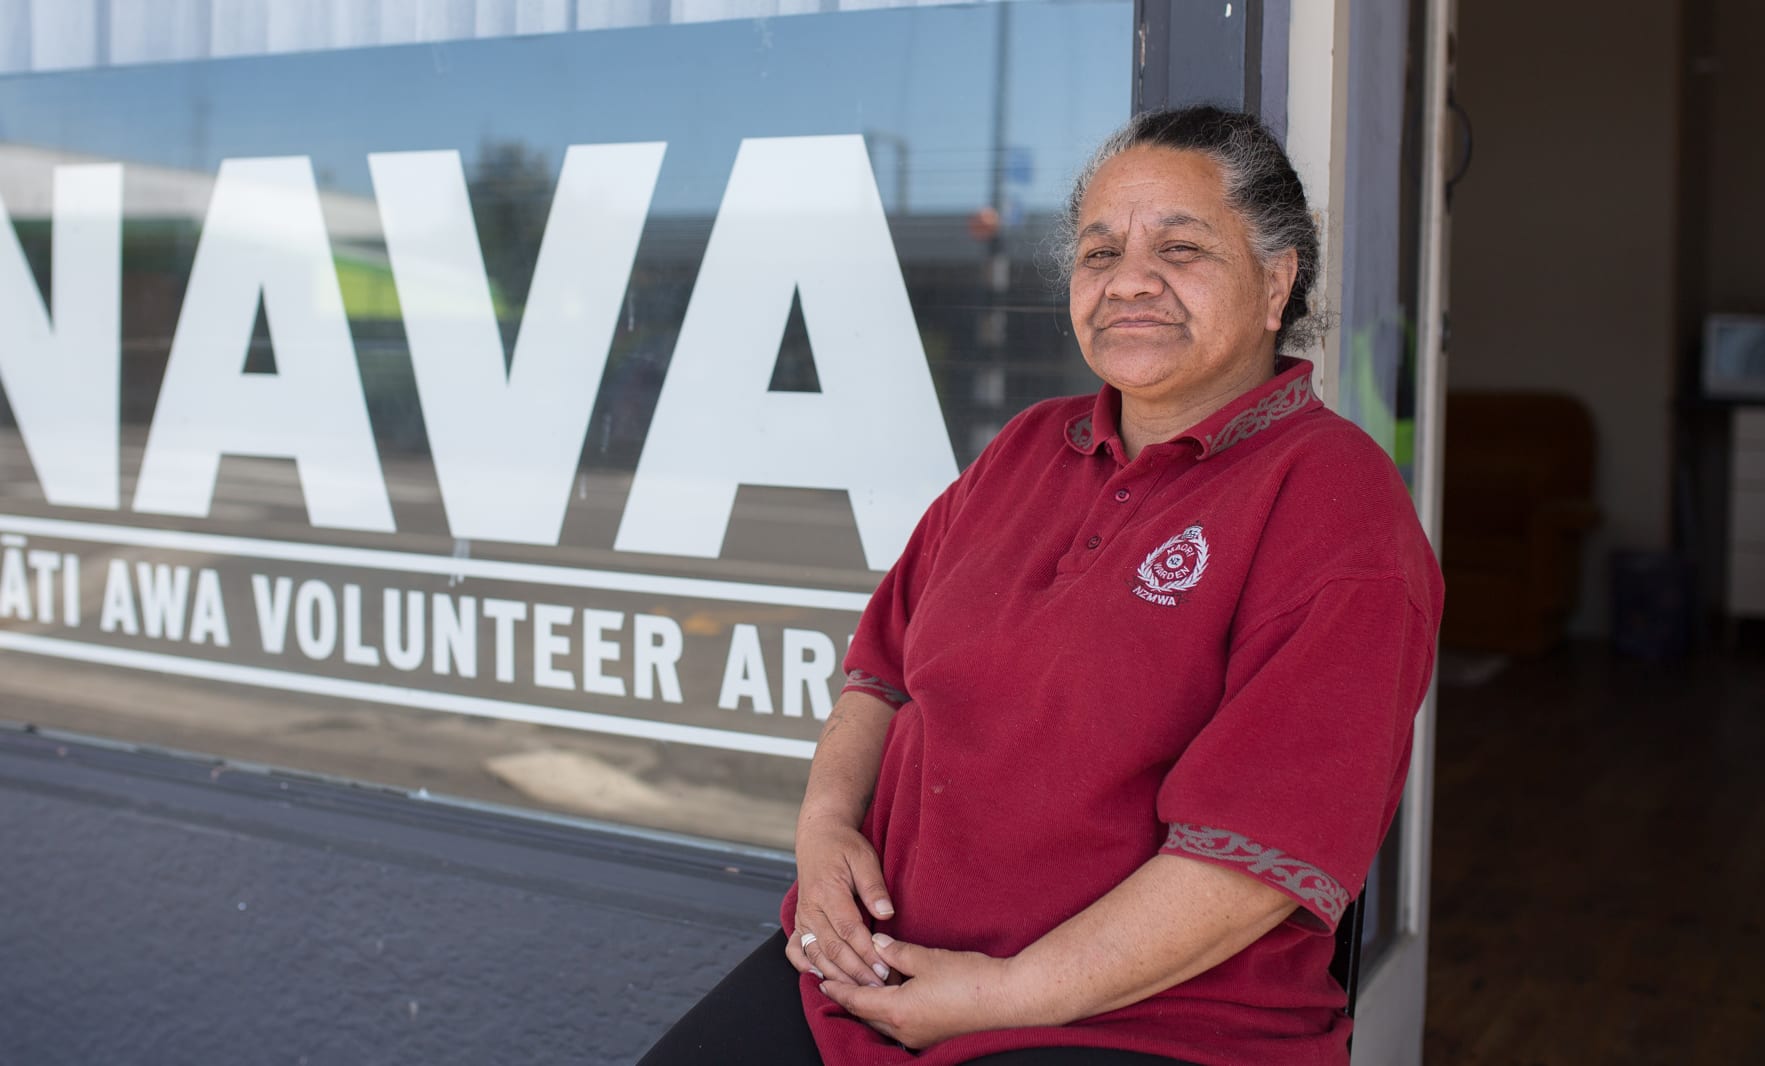 Ngati Awa Volunteer Army coordinator Alex Walker says it's taking a long time for people to feel positive again